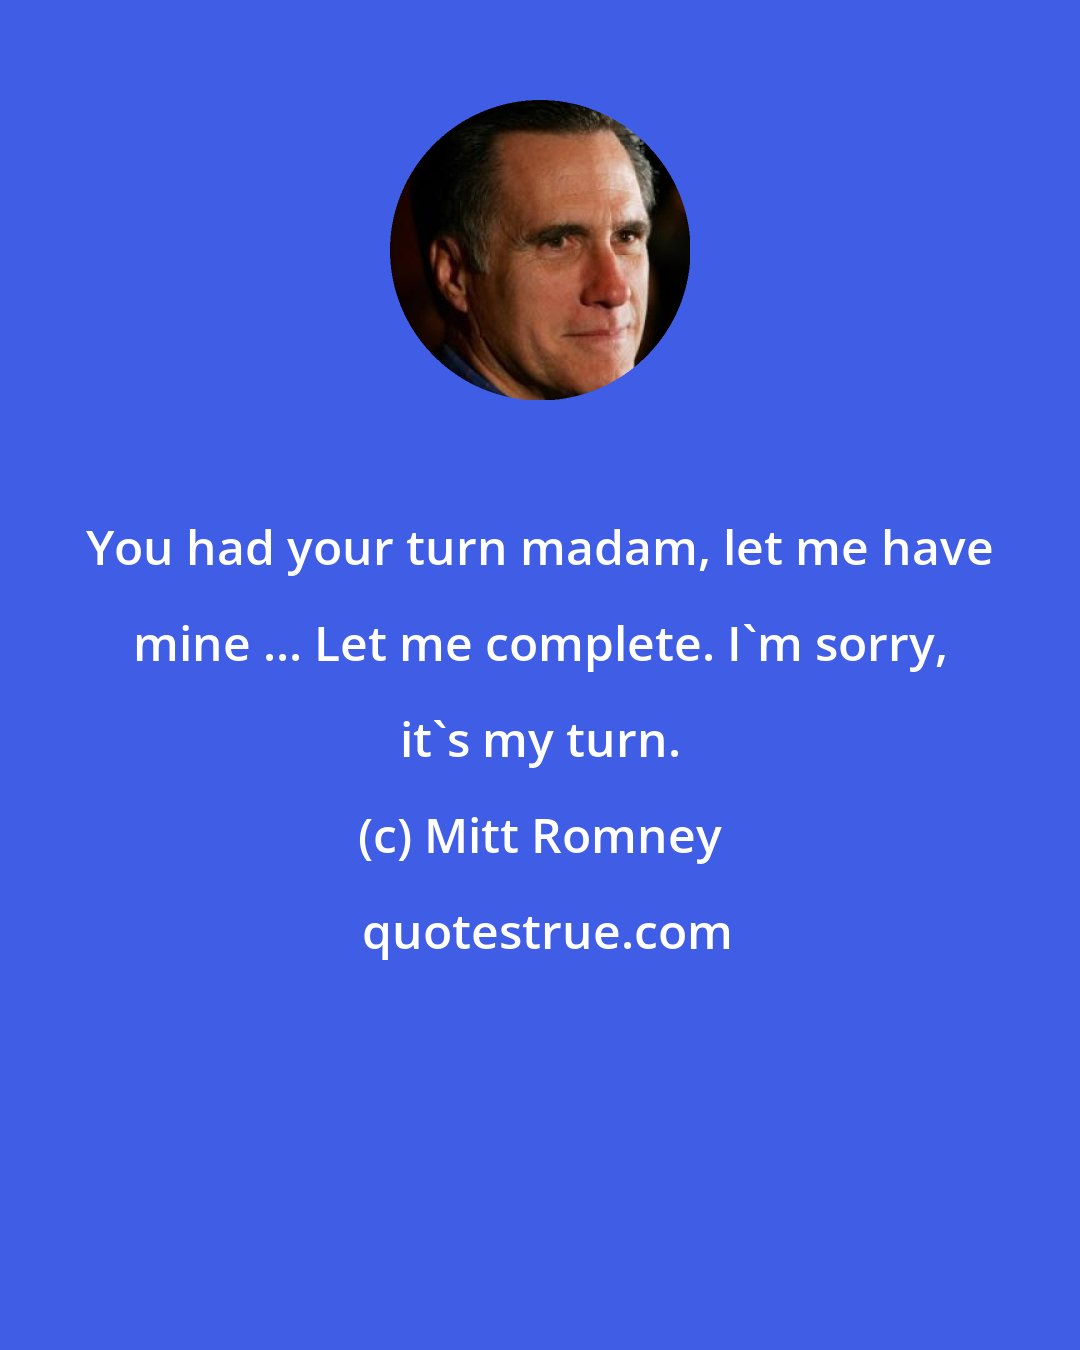 Mitt Romney: You had your turn madam, let me have mine ... Let me complete. I'm sorry, it's my turn.